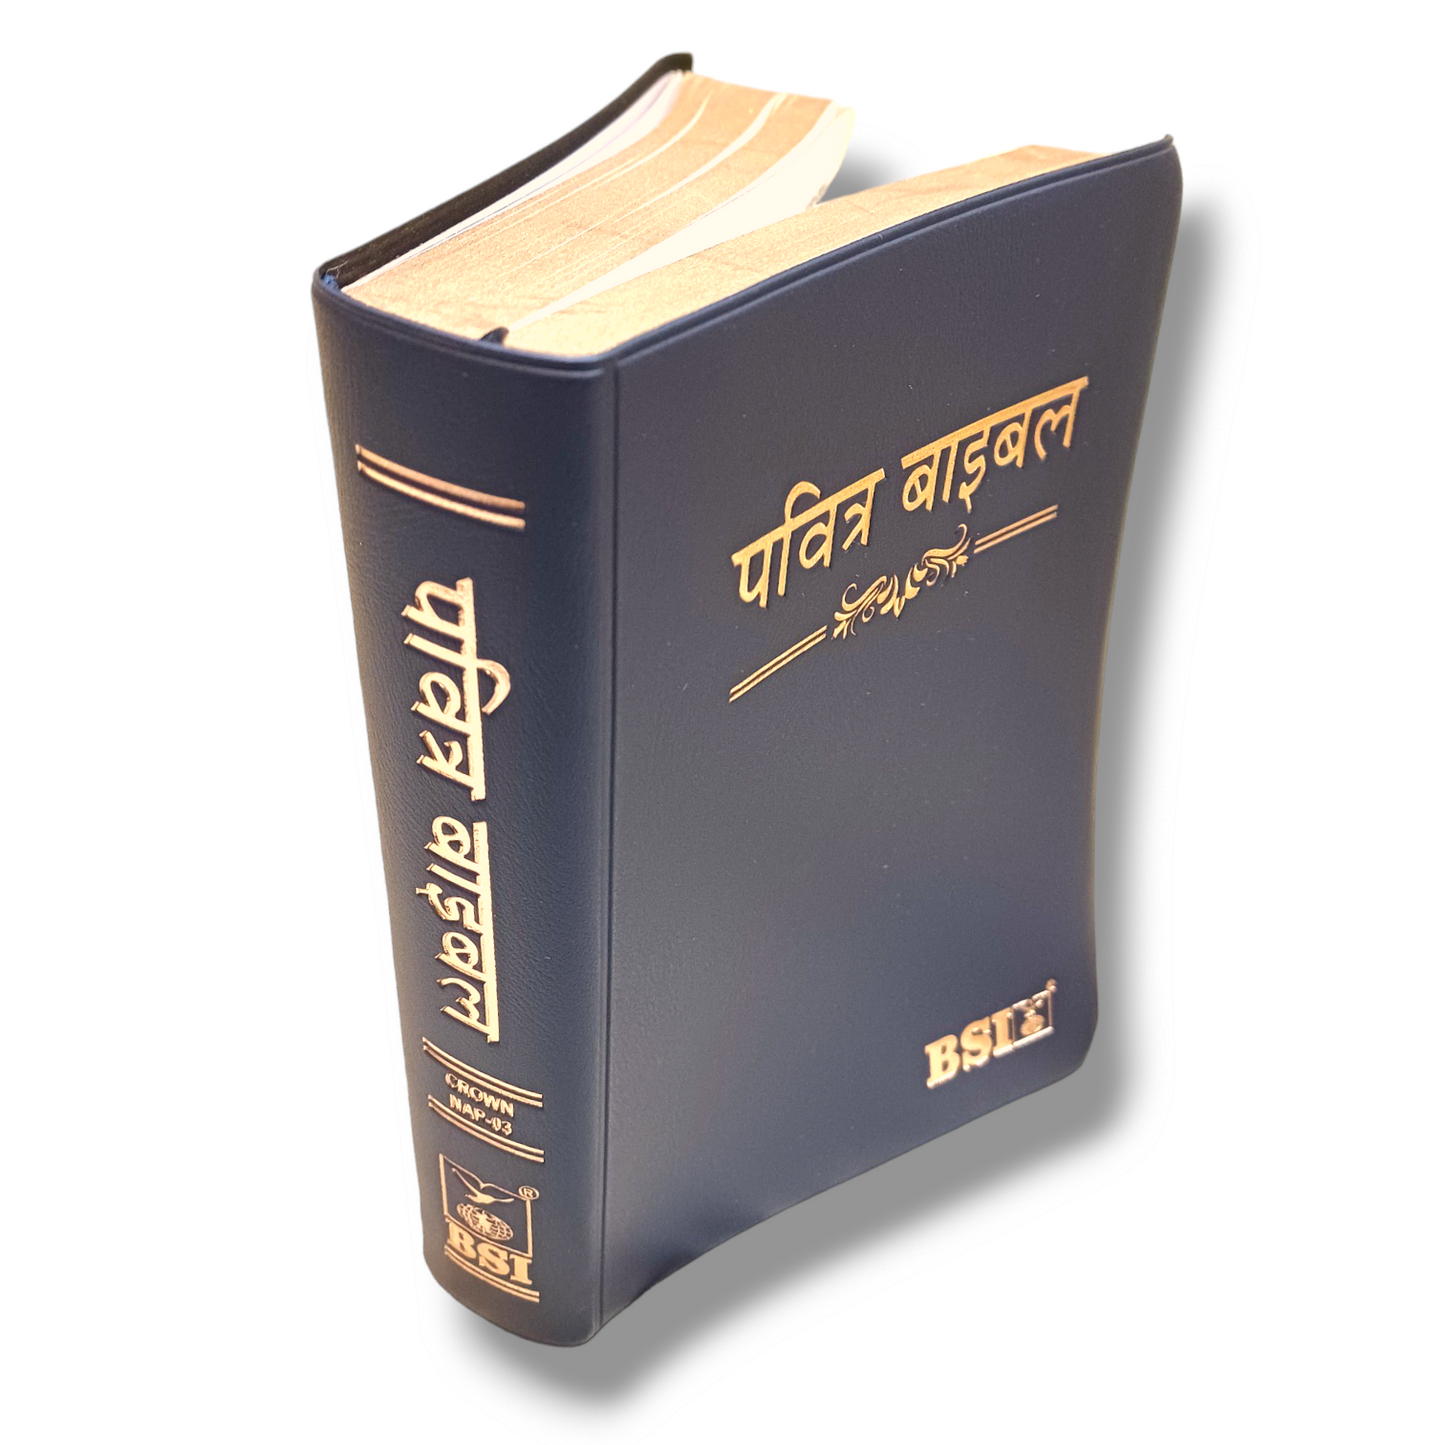 The Holy Bible In Hindi |Crown Navy Blue Color Bound |Golden Edge Bible |Hindi Compact Size Bible